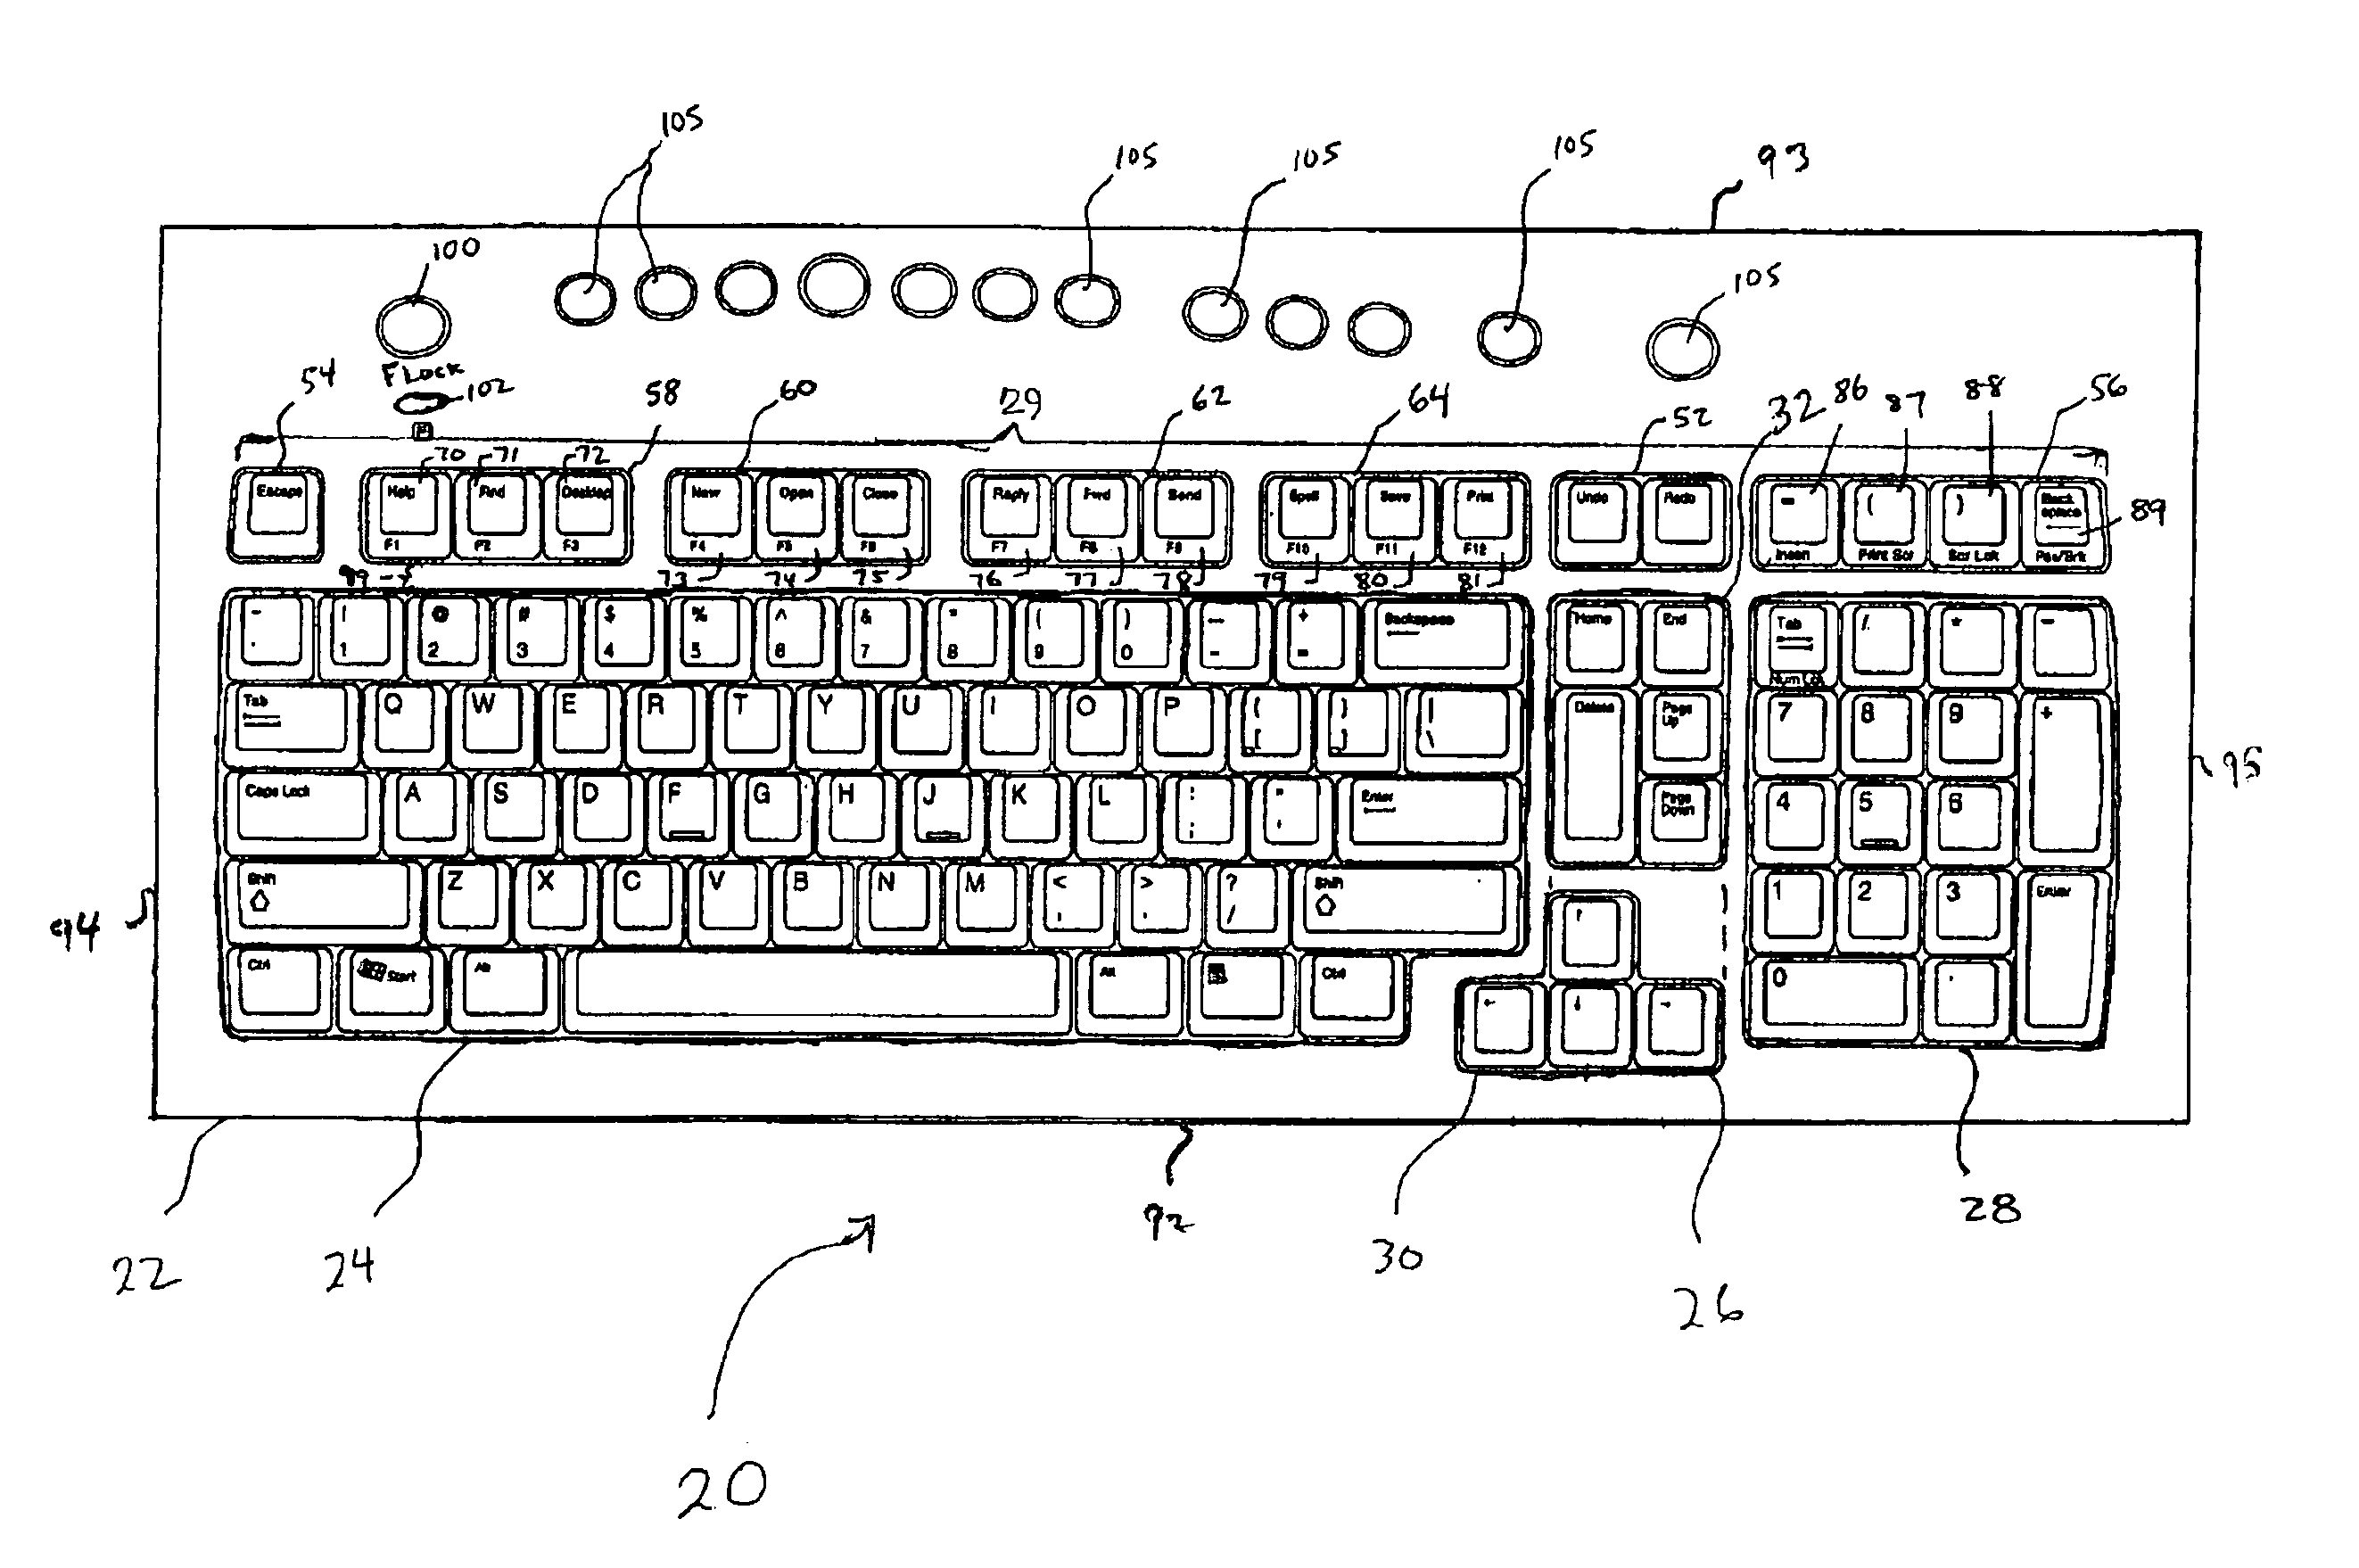 Keyboard with improved function and editing sections